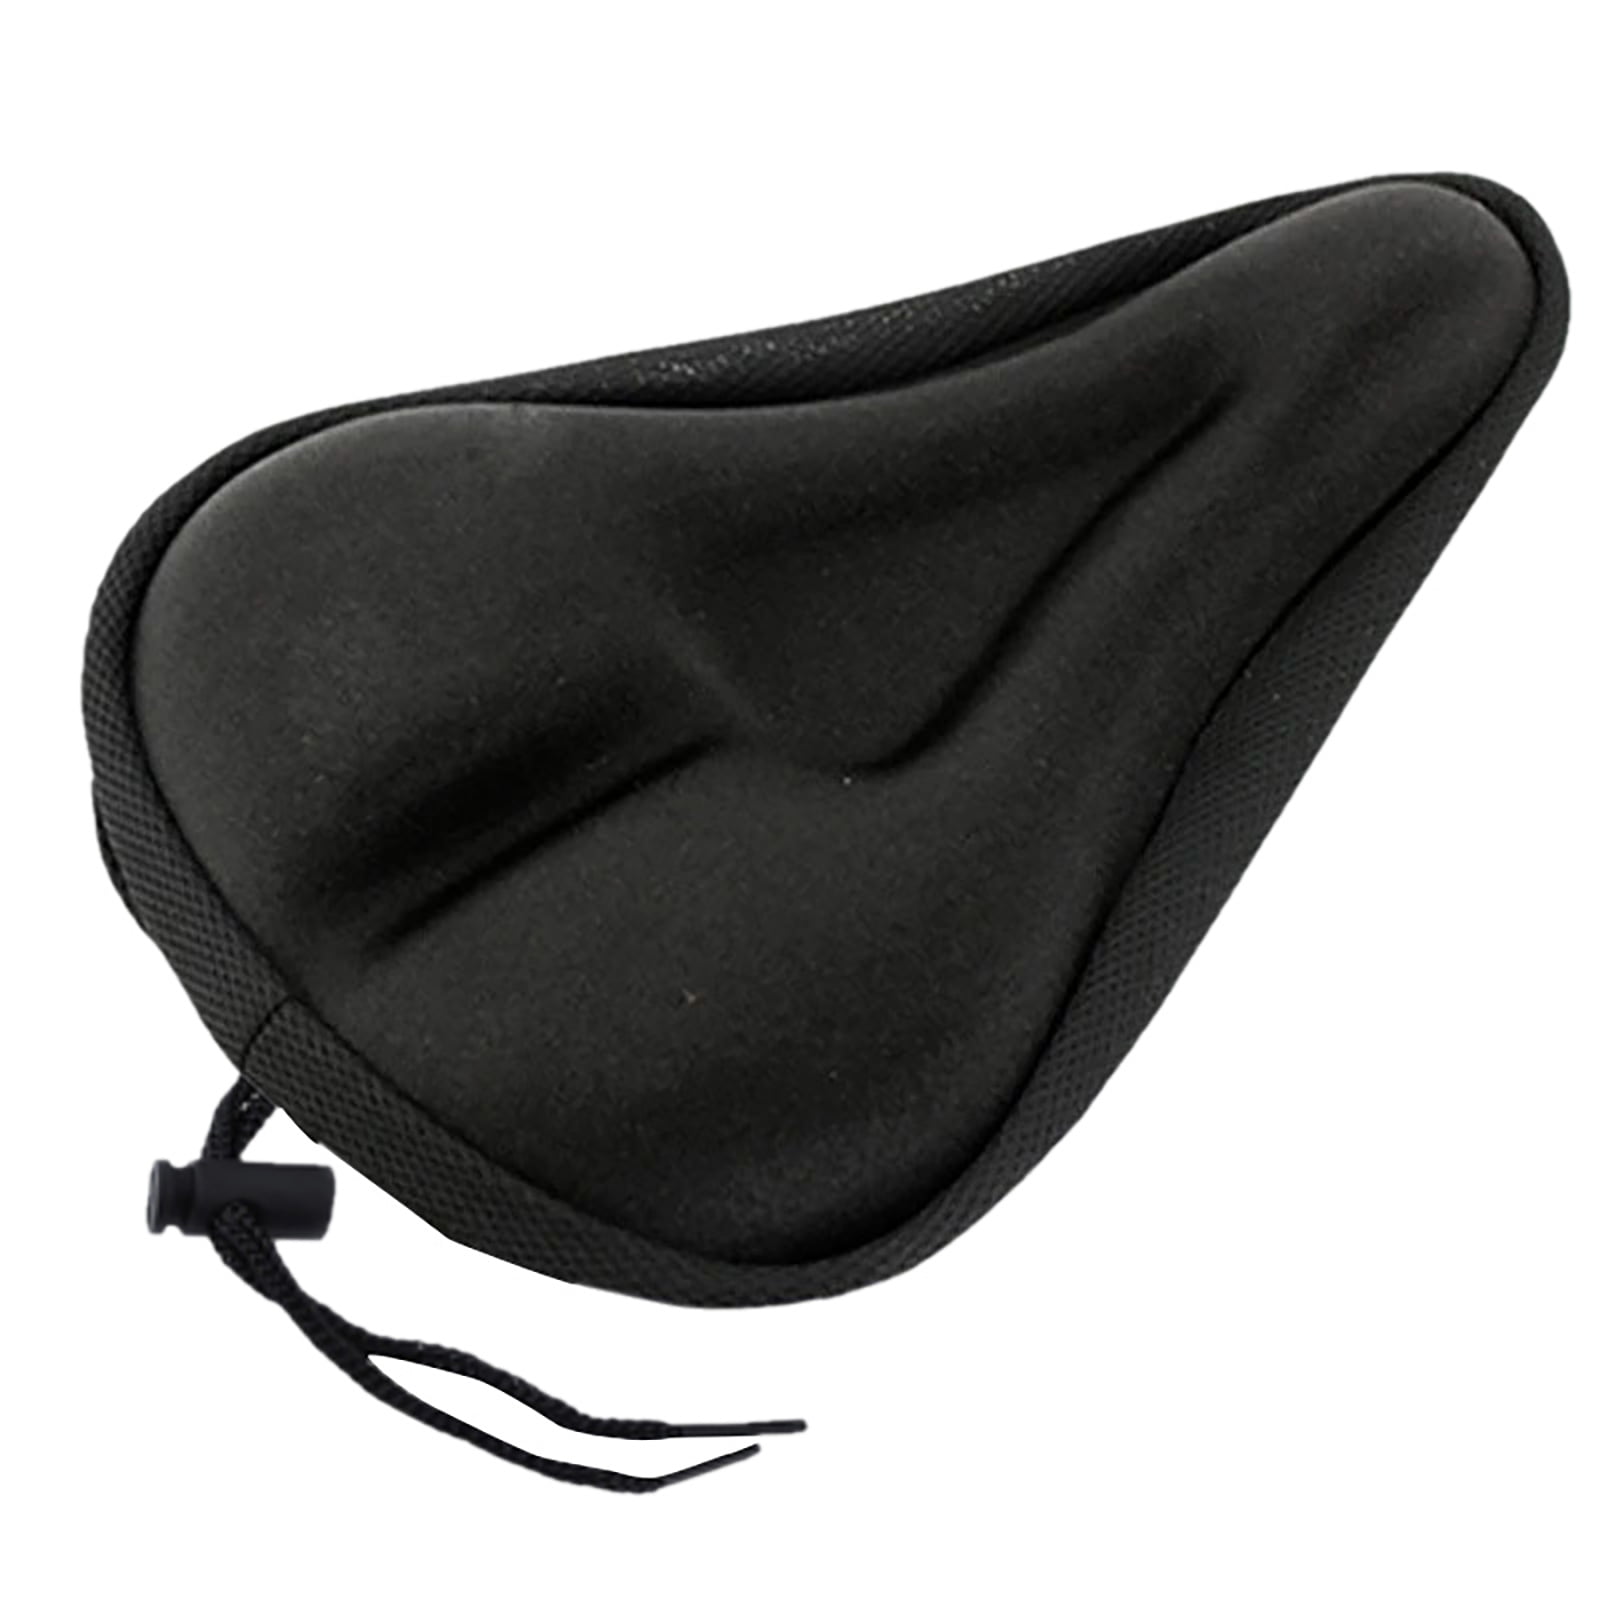 Details about   Lightweight Bike Saddle Silicone Cushion Cycling Seat Shockproof Bicycle Saddle 